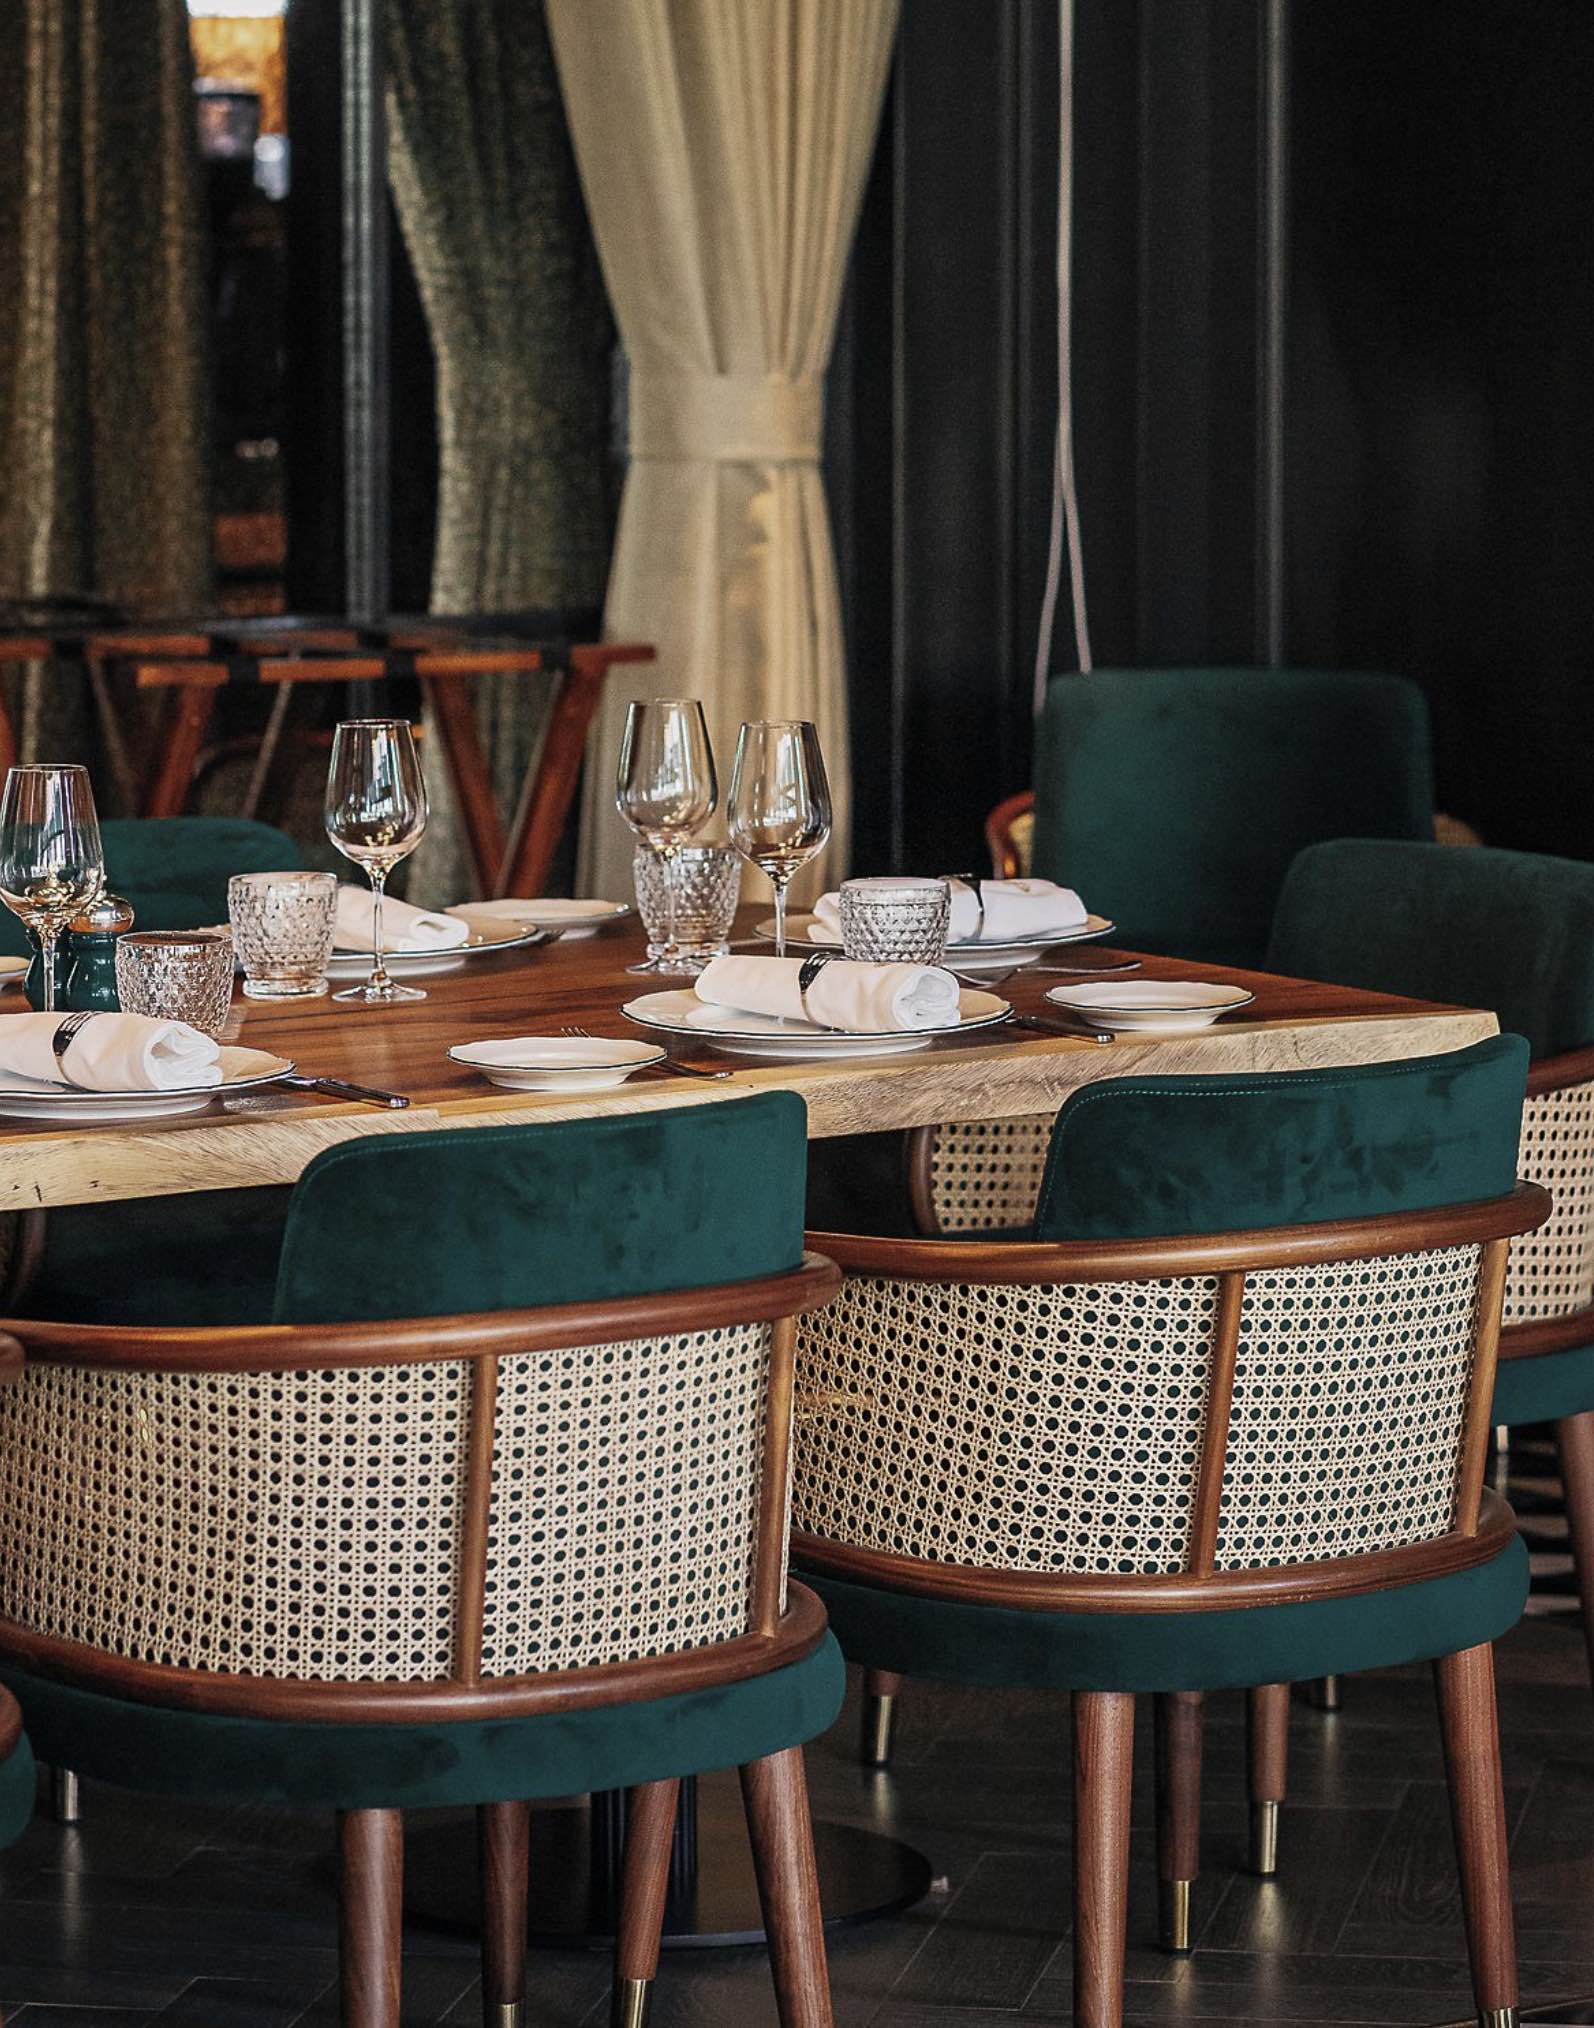 If you are after an elegant osteria ambiance for your business lunch in Dubai Chic Nonna is a great choice! Photo by Chic Nonna